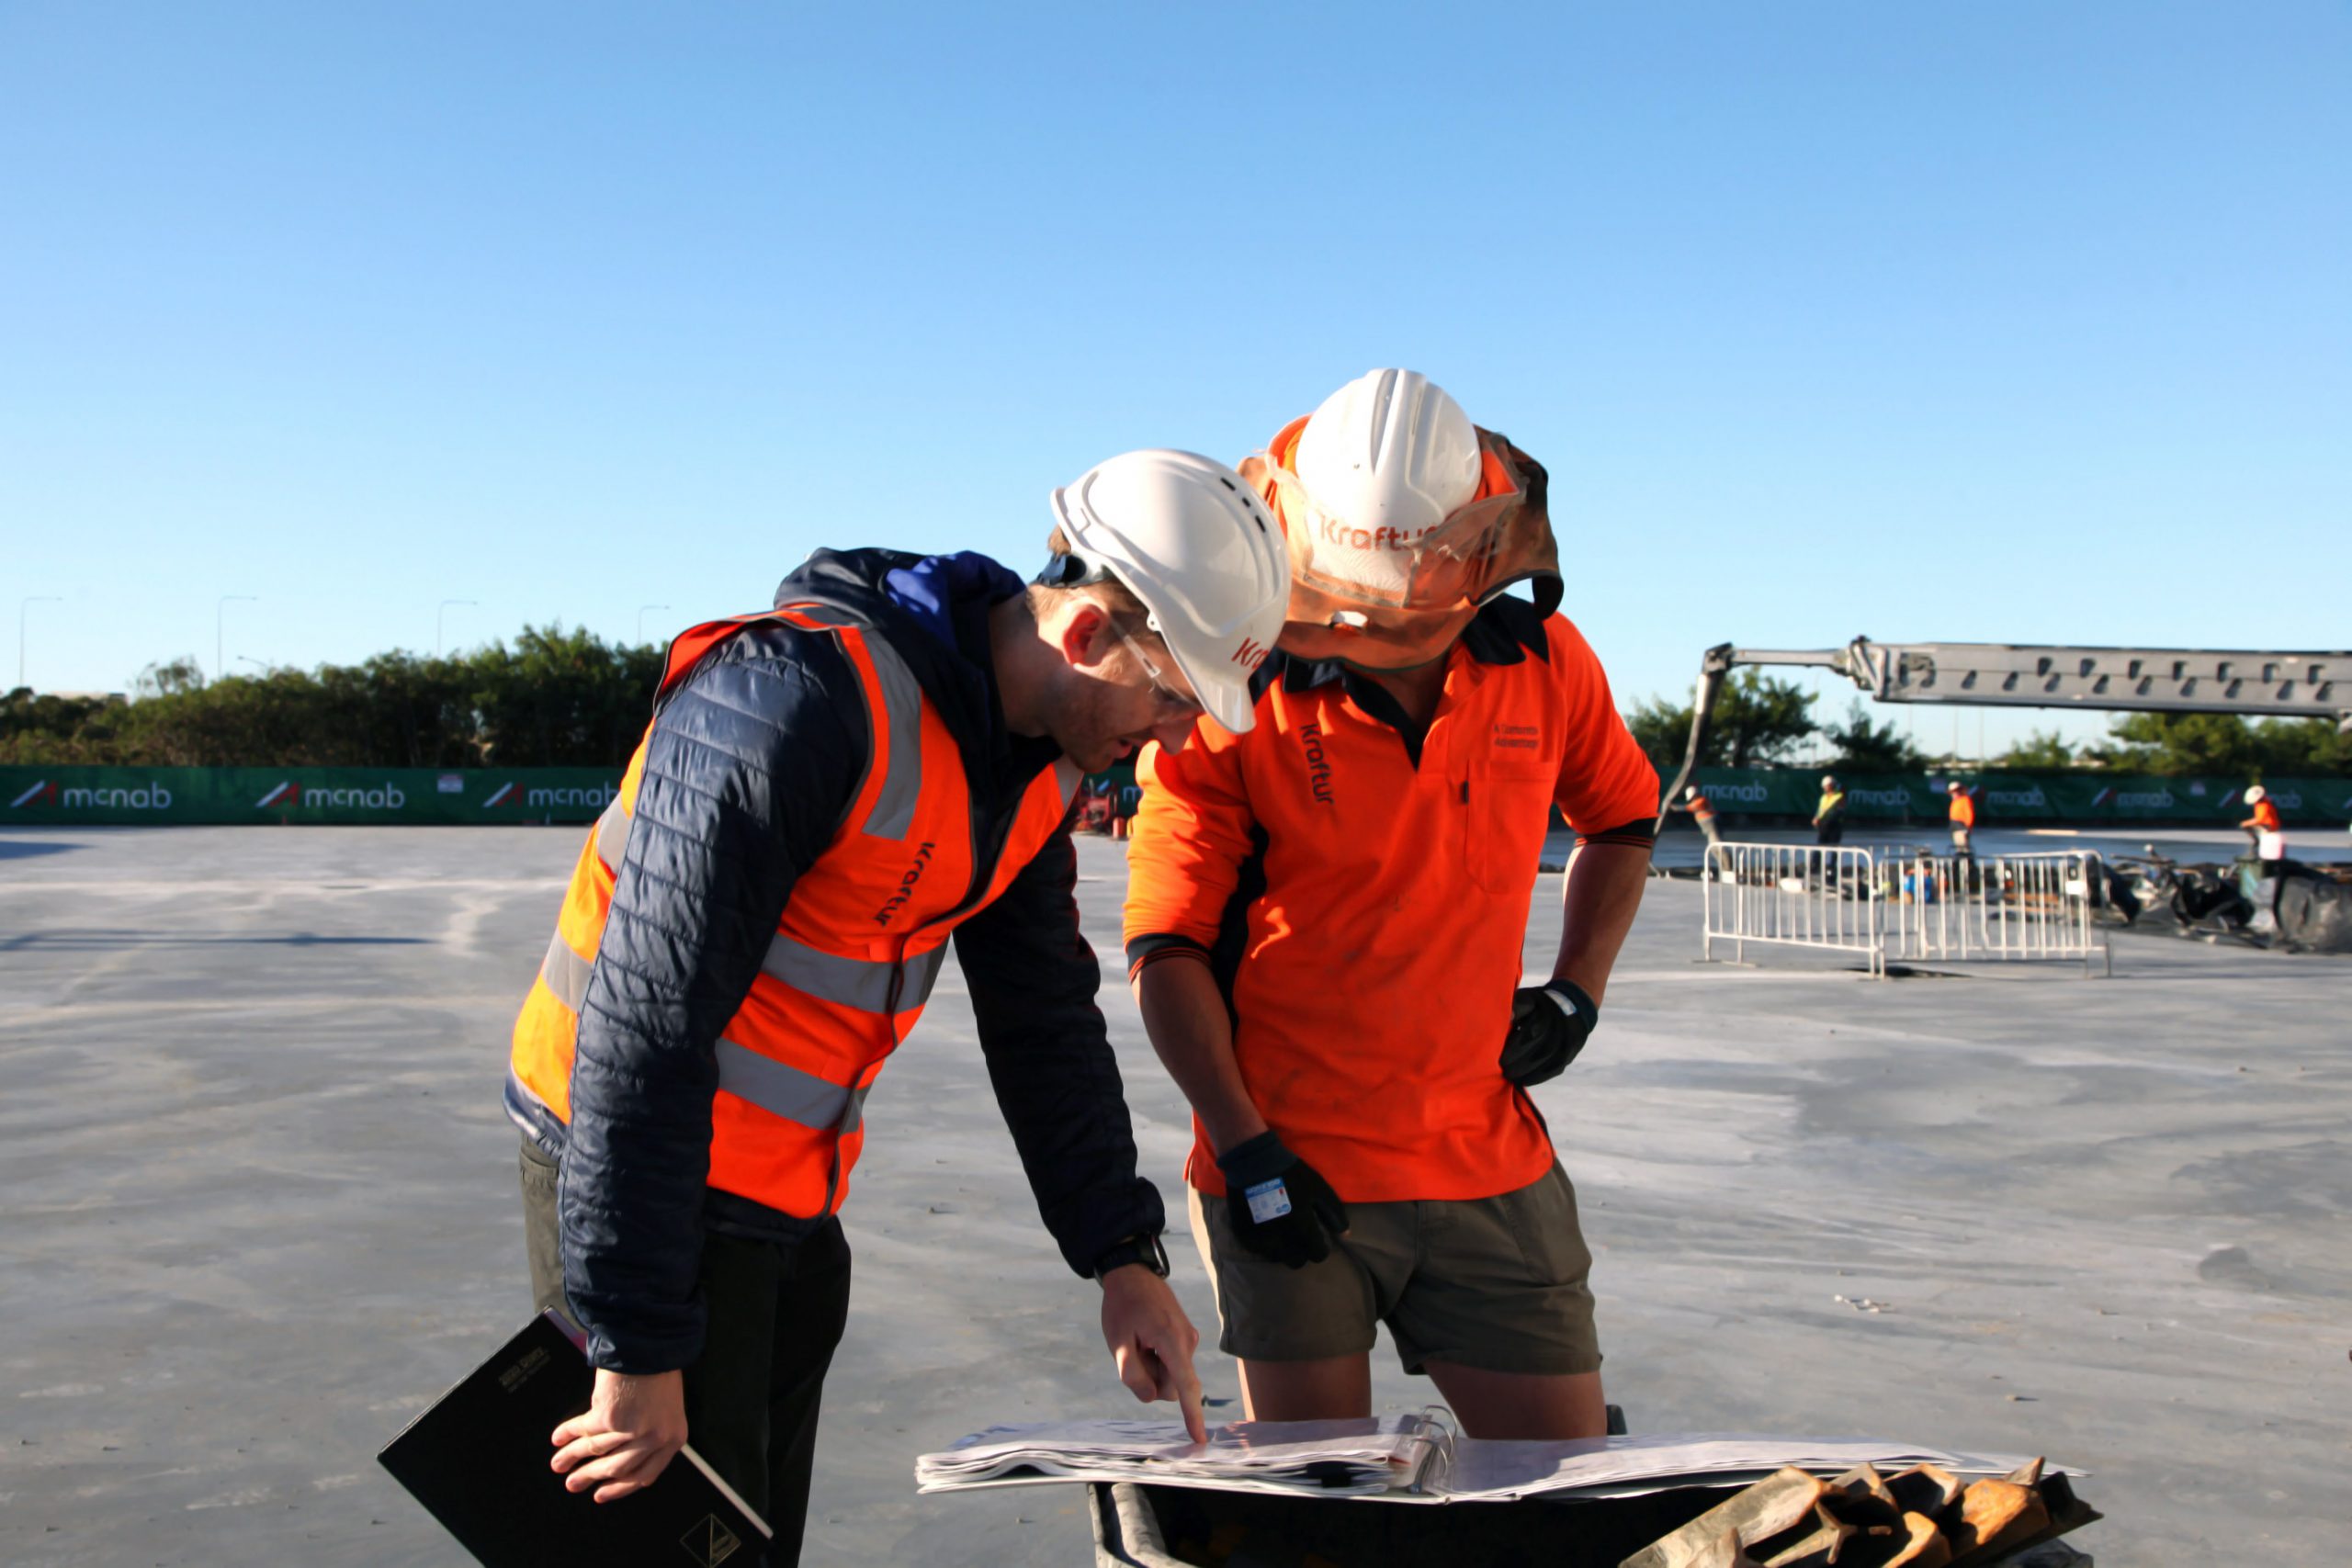 Kraftur site supervisor and contrats manager on site